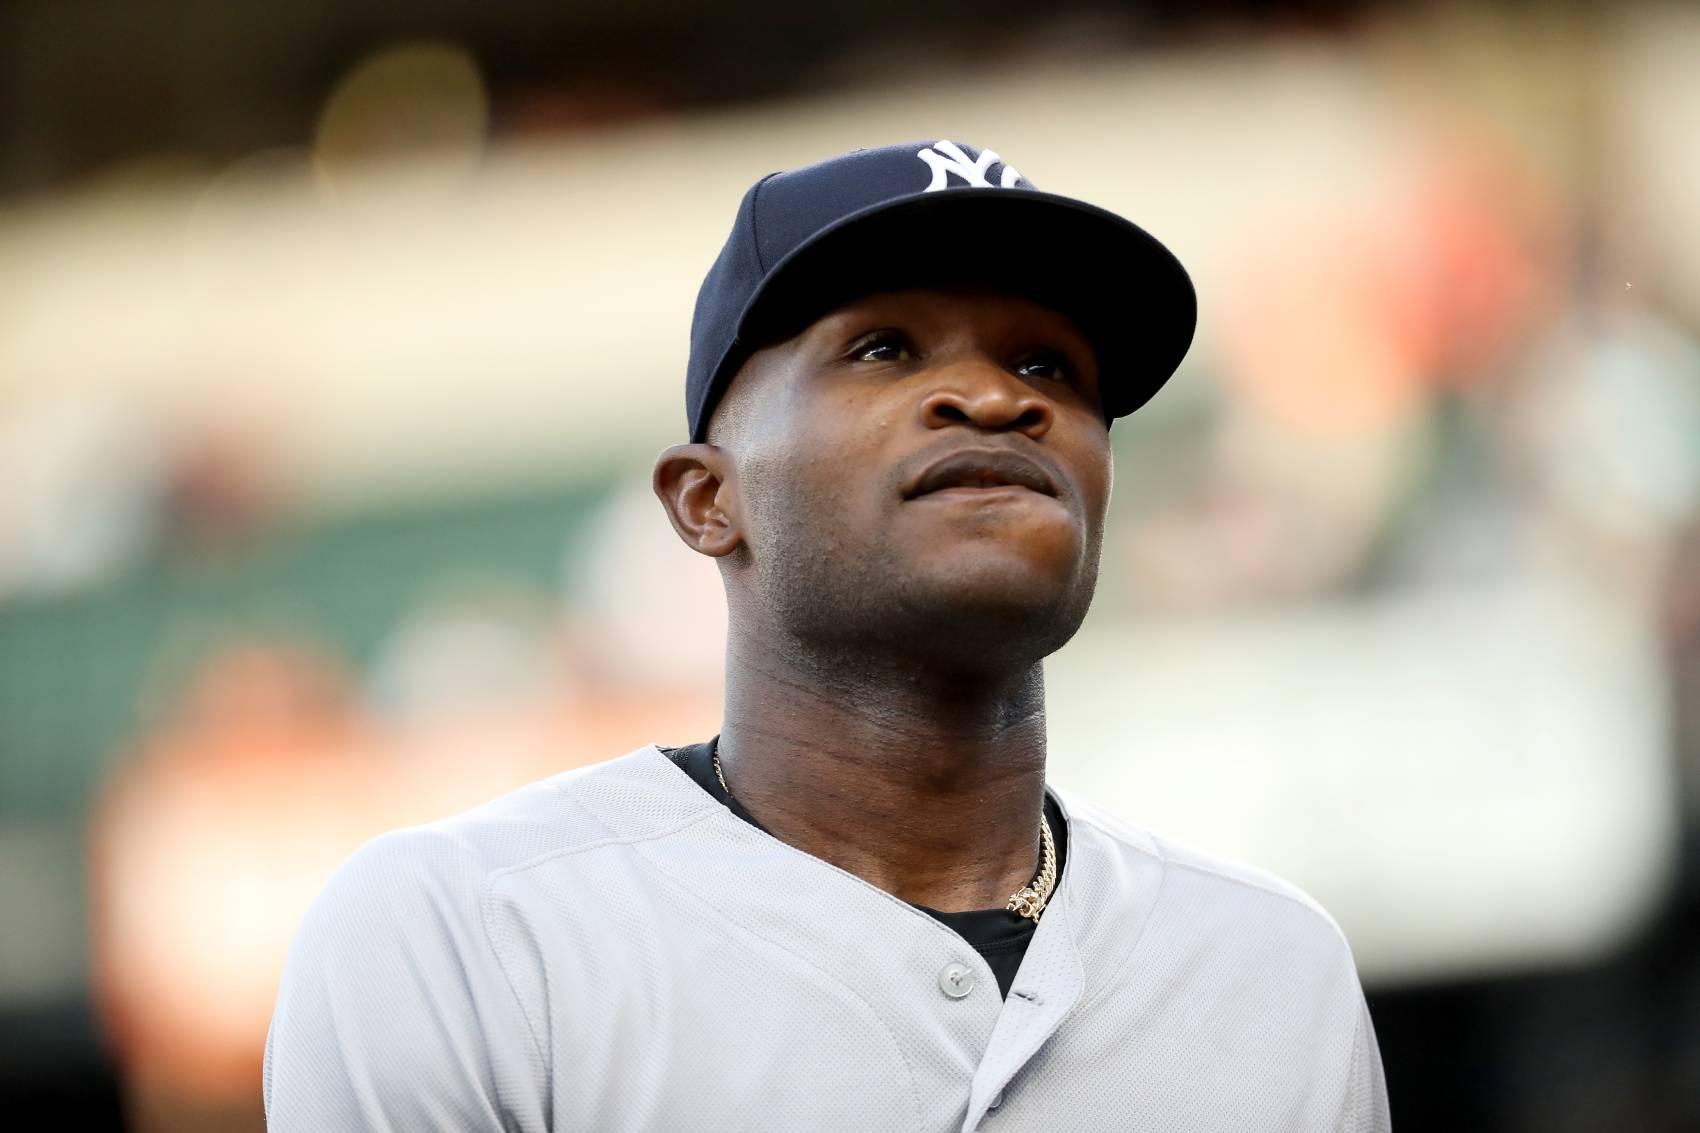 Domingo Germán, a breakout pitcher for the Yankees last year, walked back retirement rumors after a cryptic social media post. 